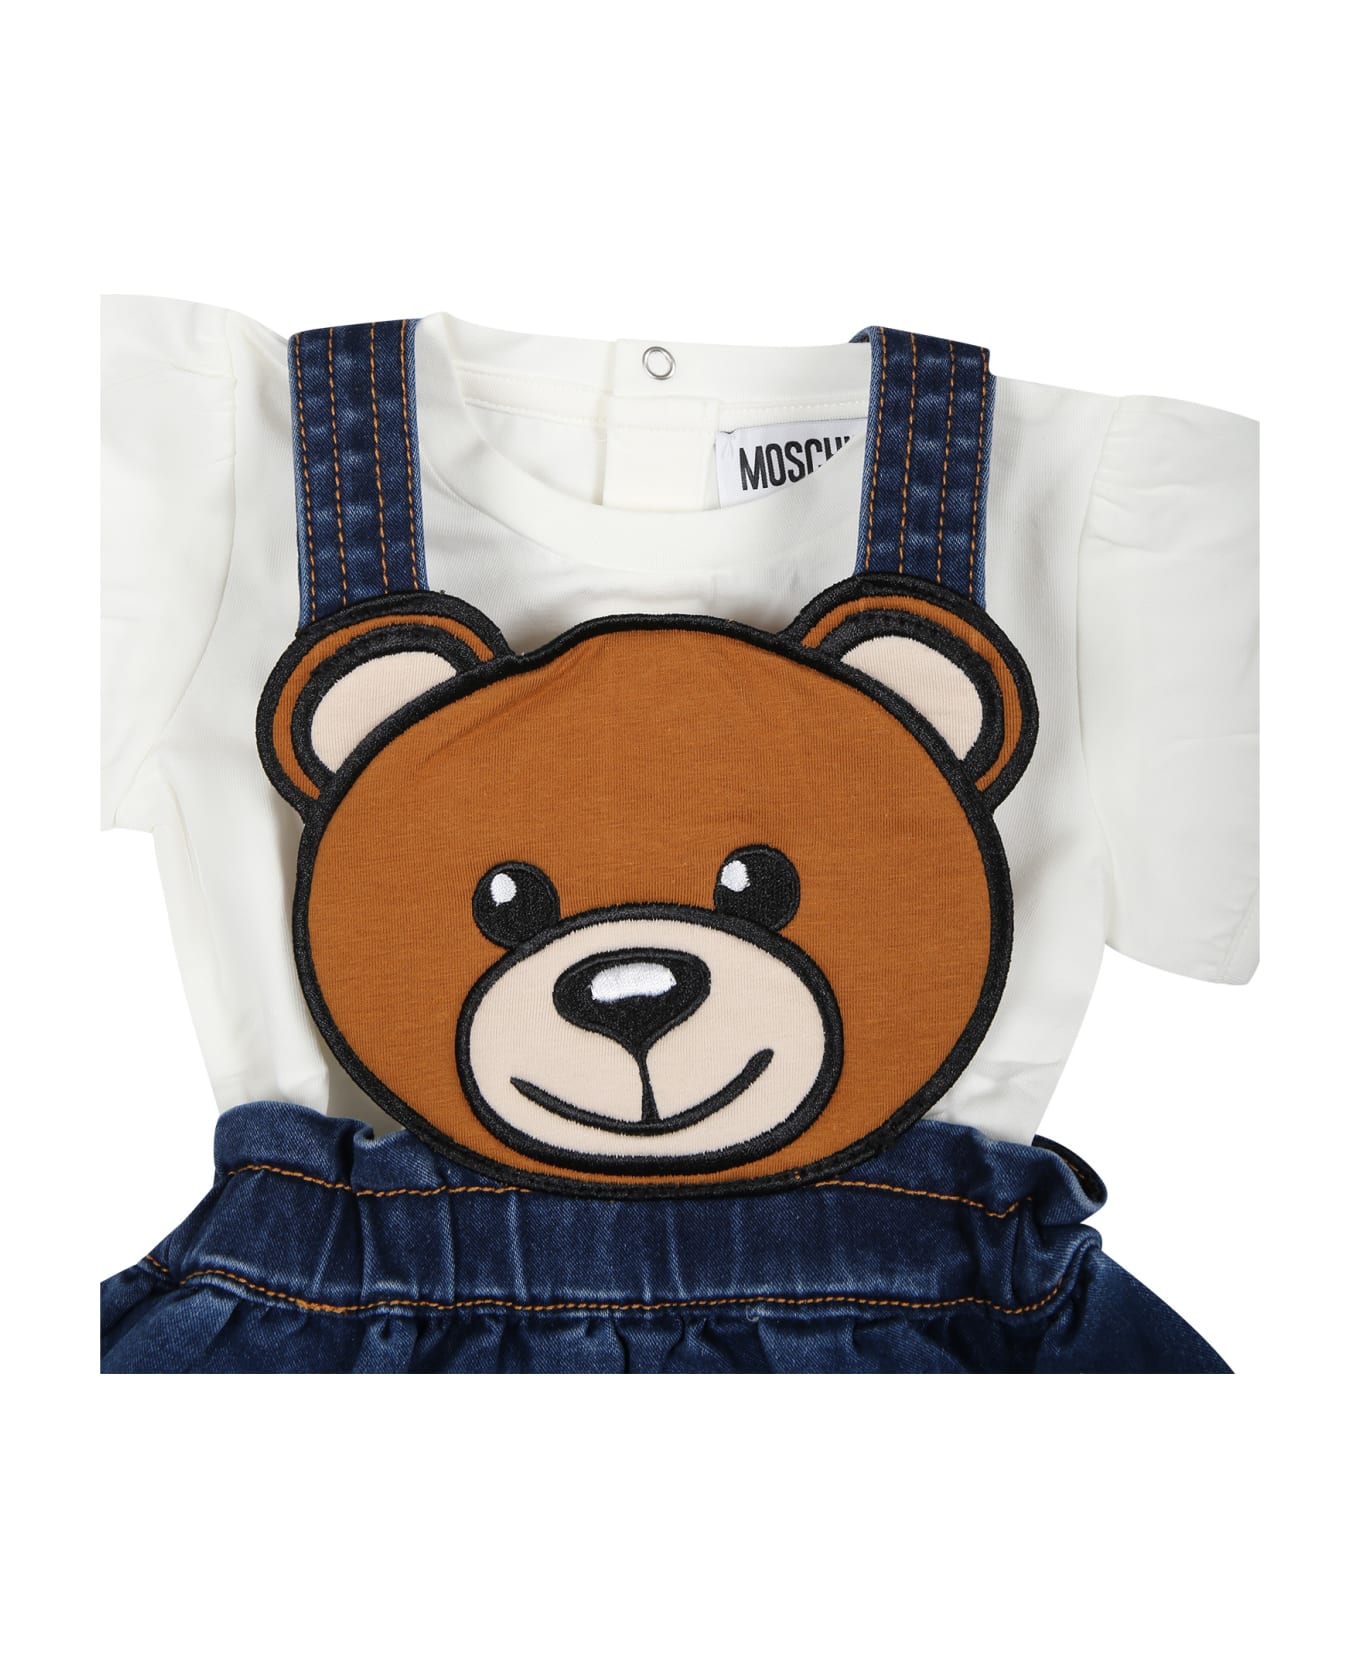 Moschino Denim Dungarees For Baby Girl With Teddy Bear - Denim